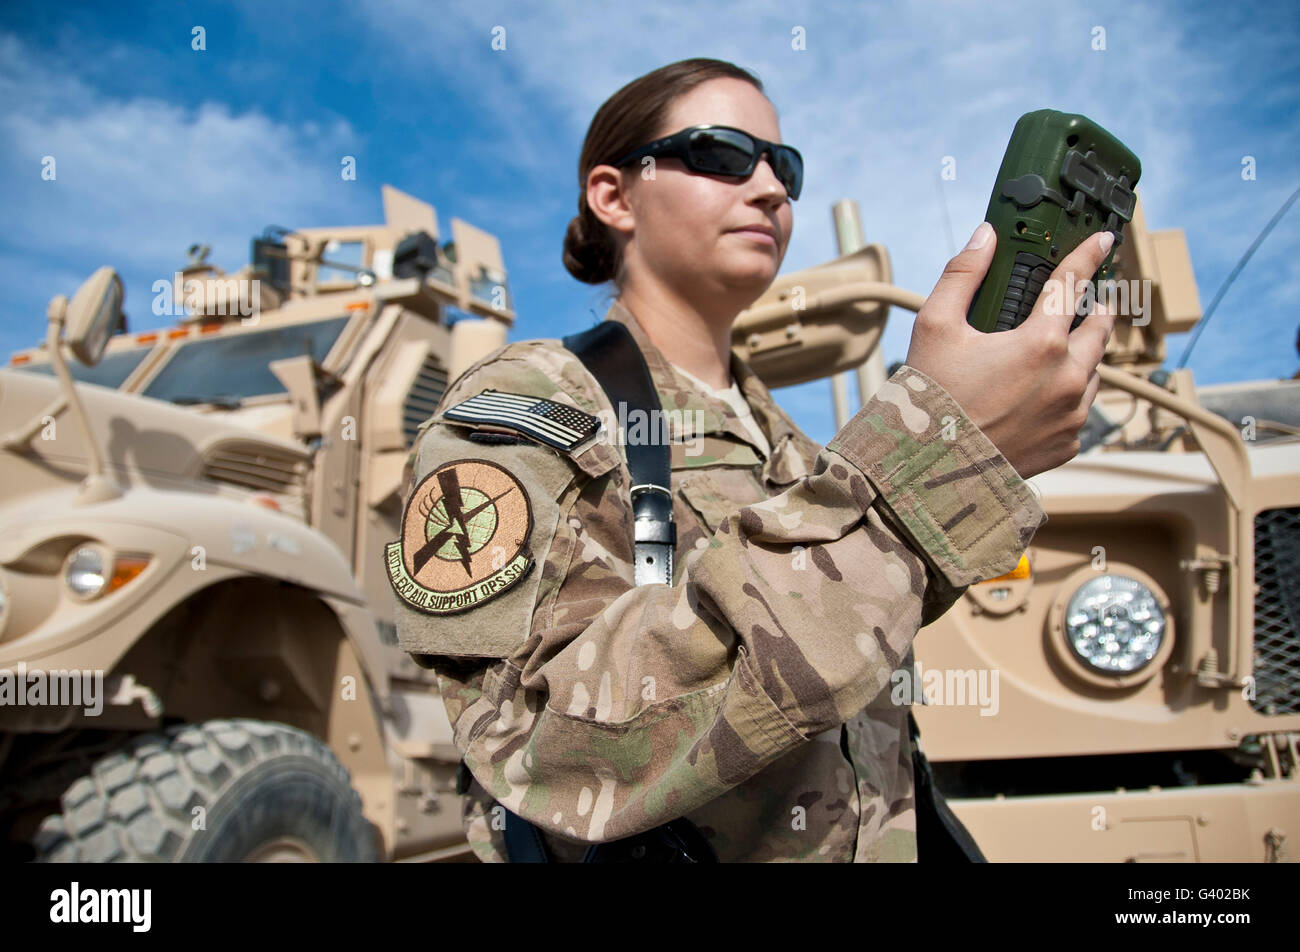 Air Force Captain looks at a Defense Advanced GPS Receiver. Stock Photo